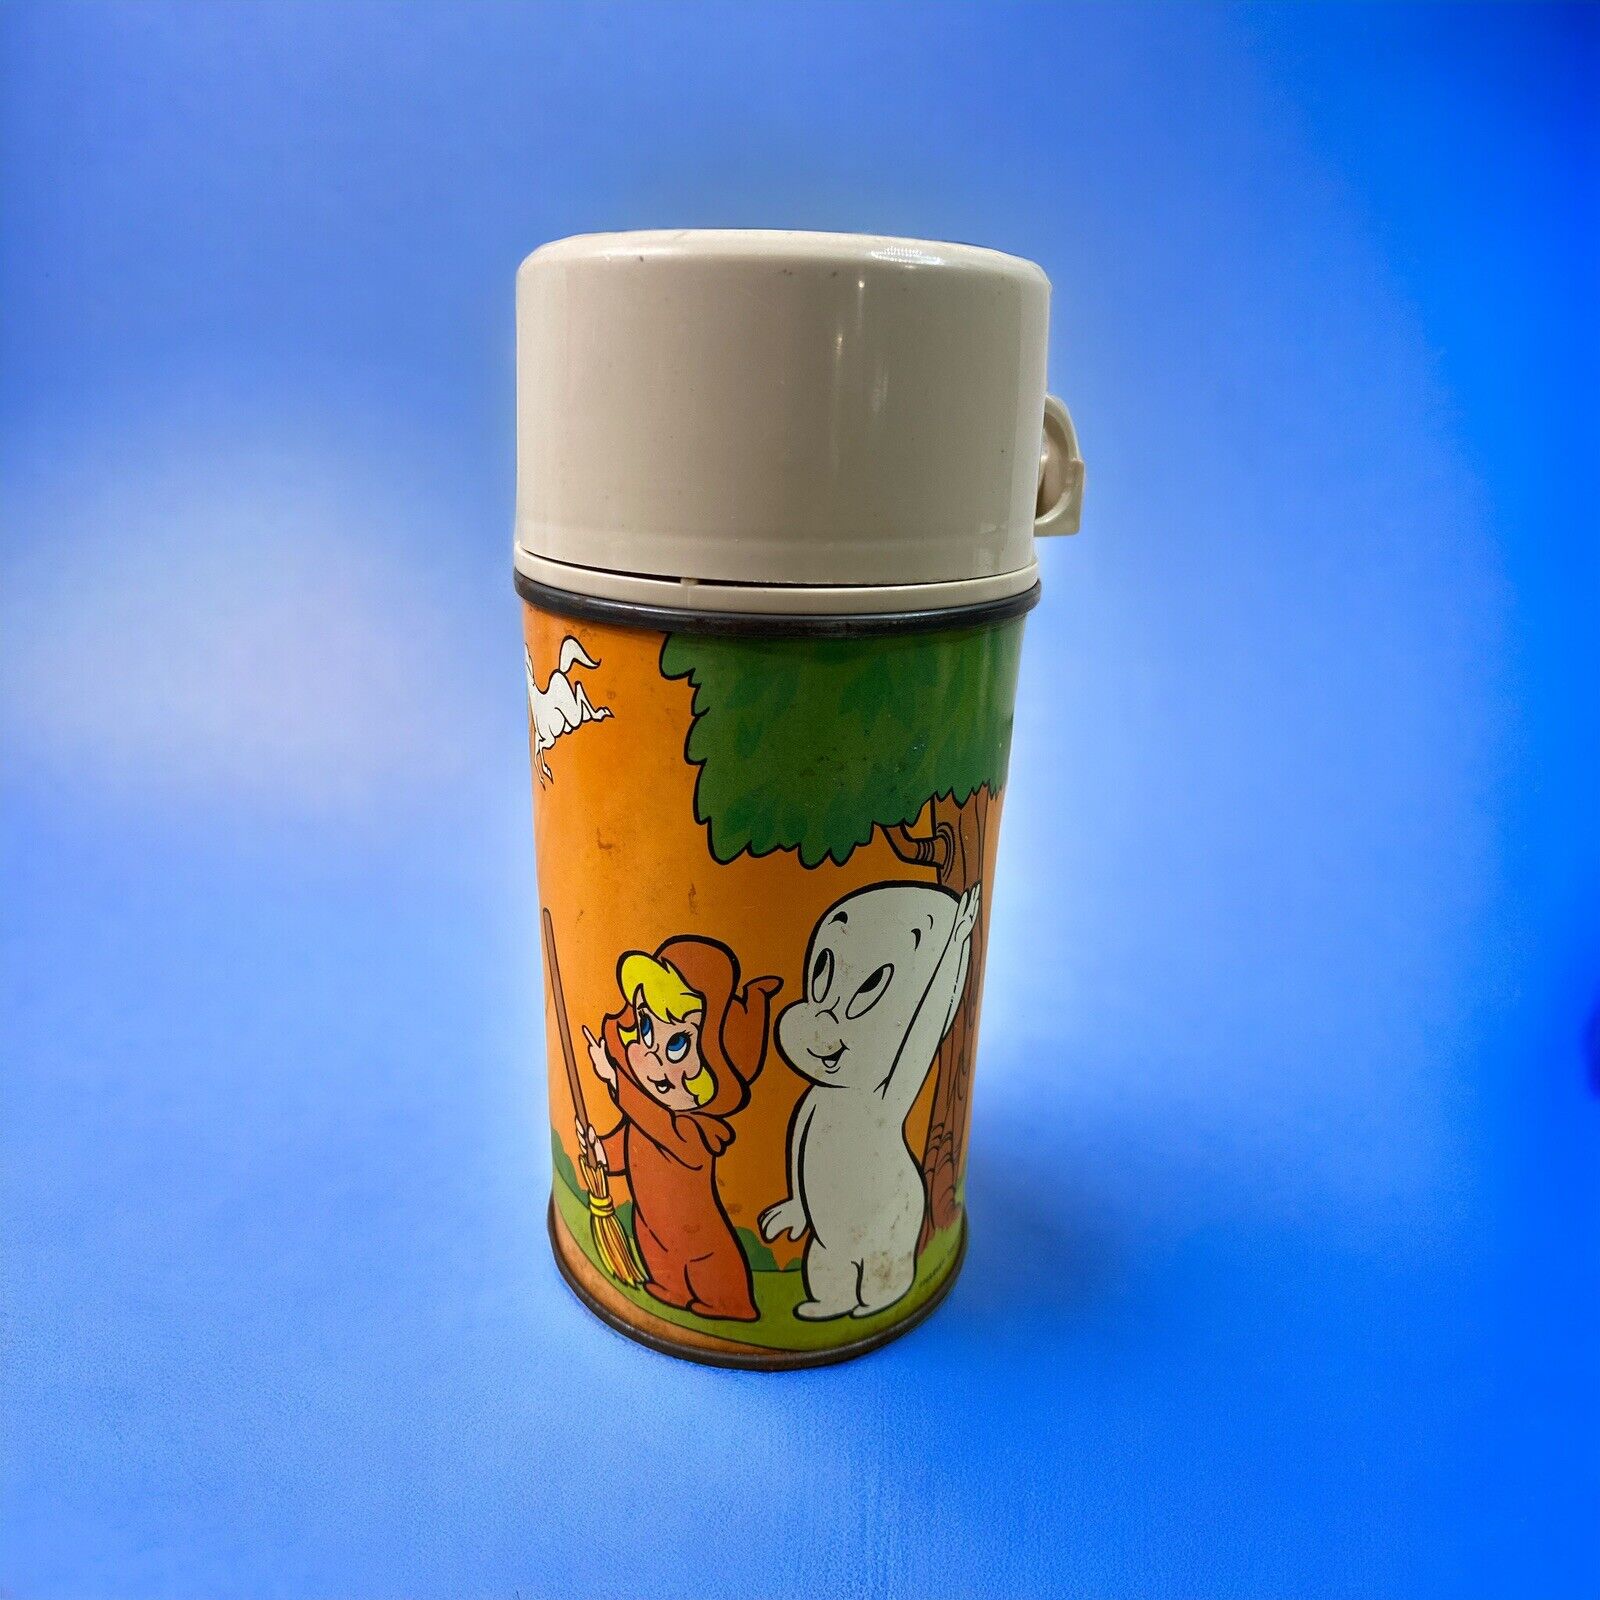 Vintage 1960s Thermos Casper The Friendly Ghost Metal King Seely